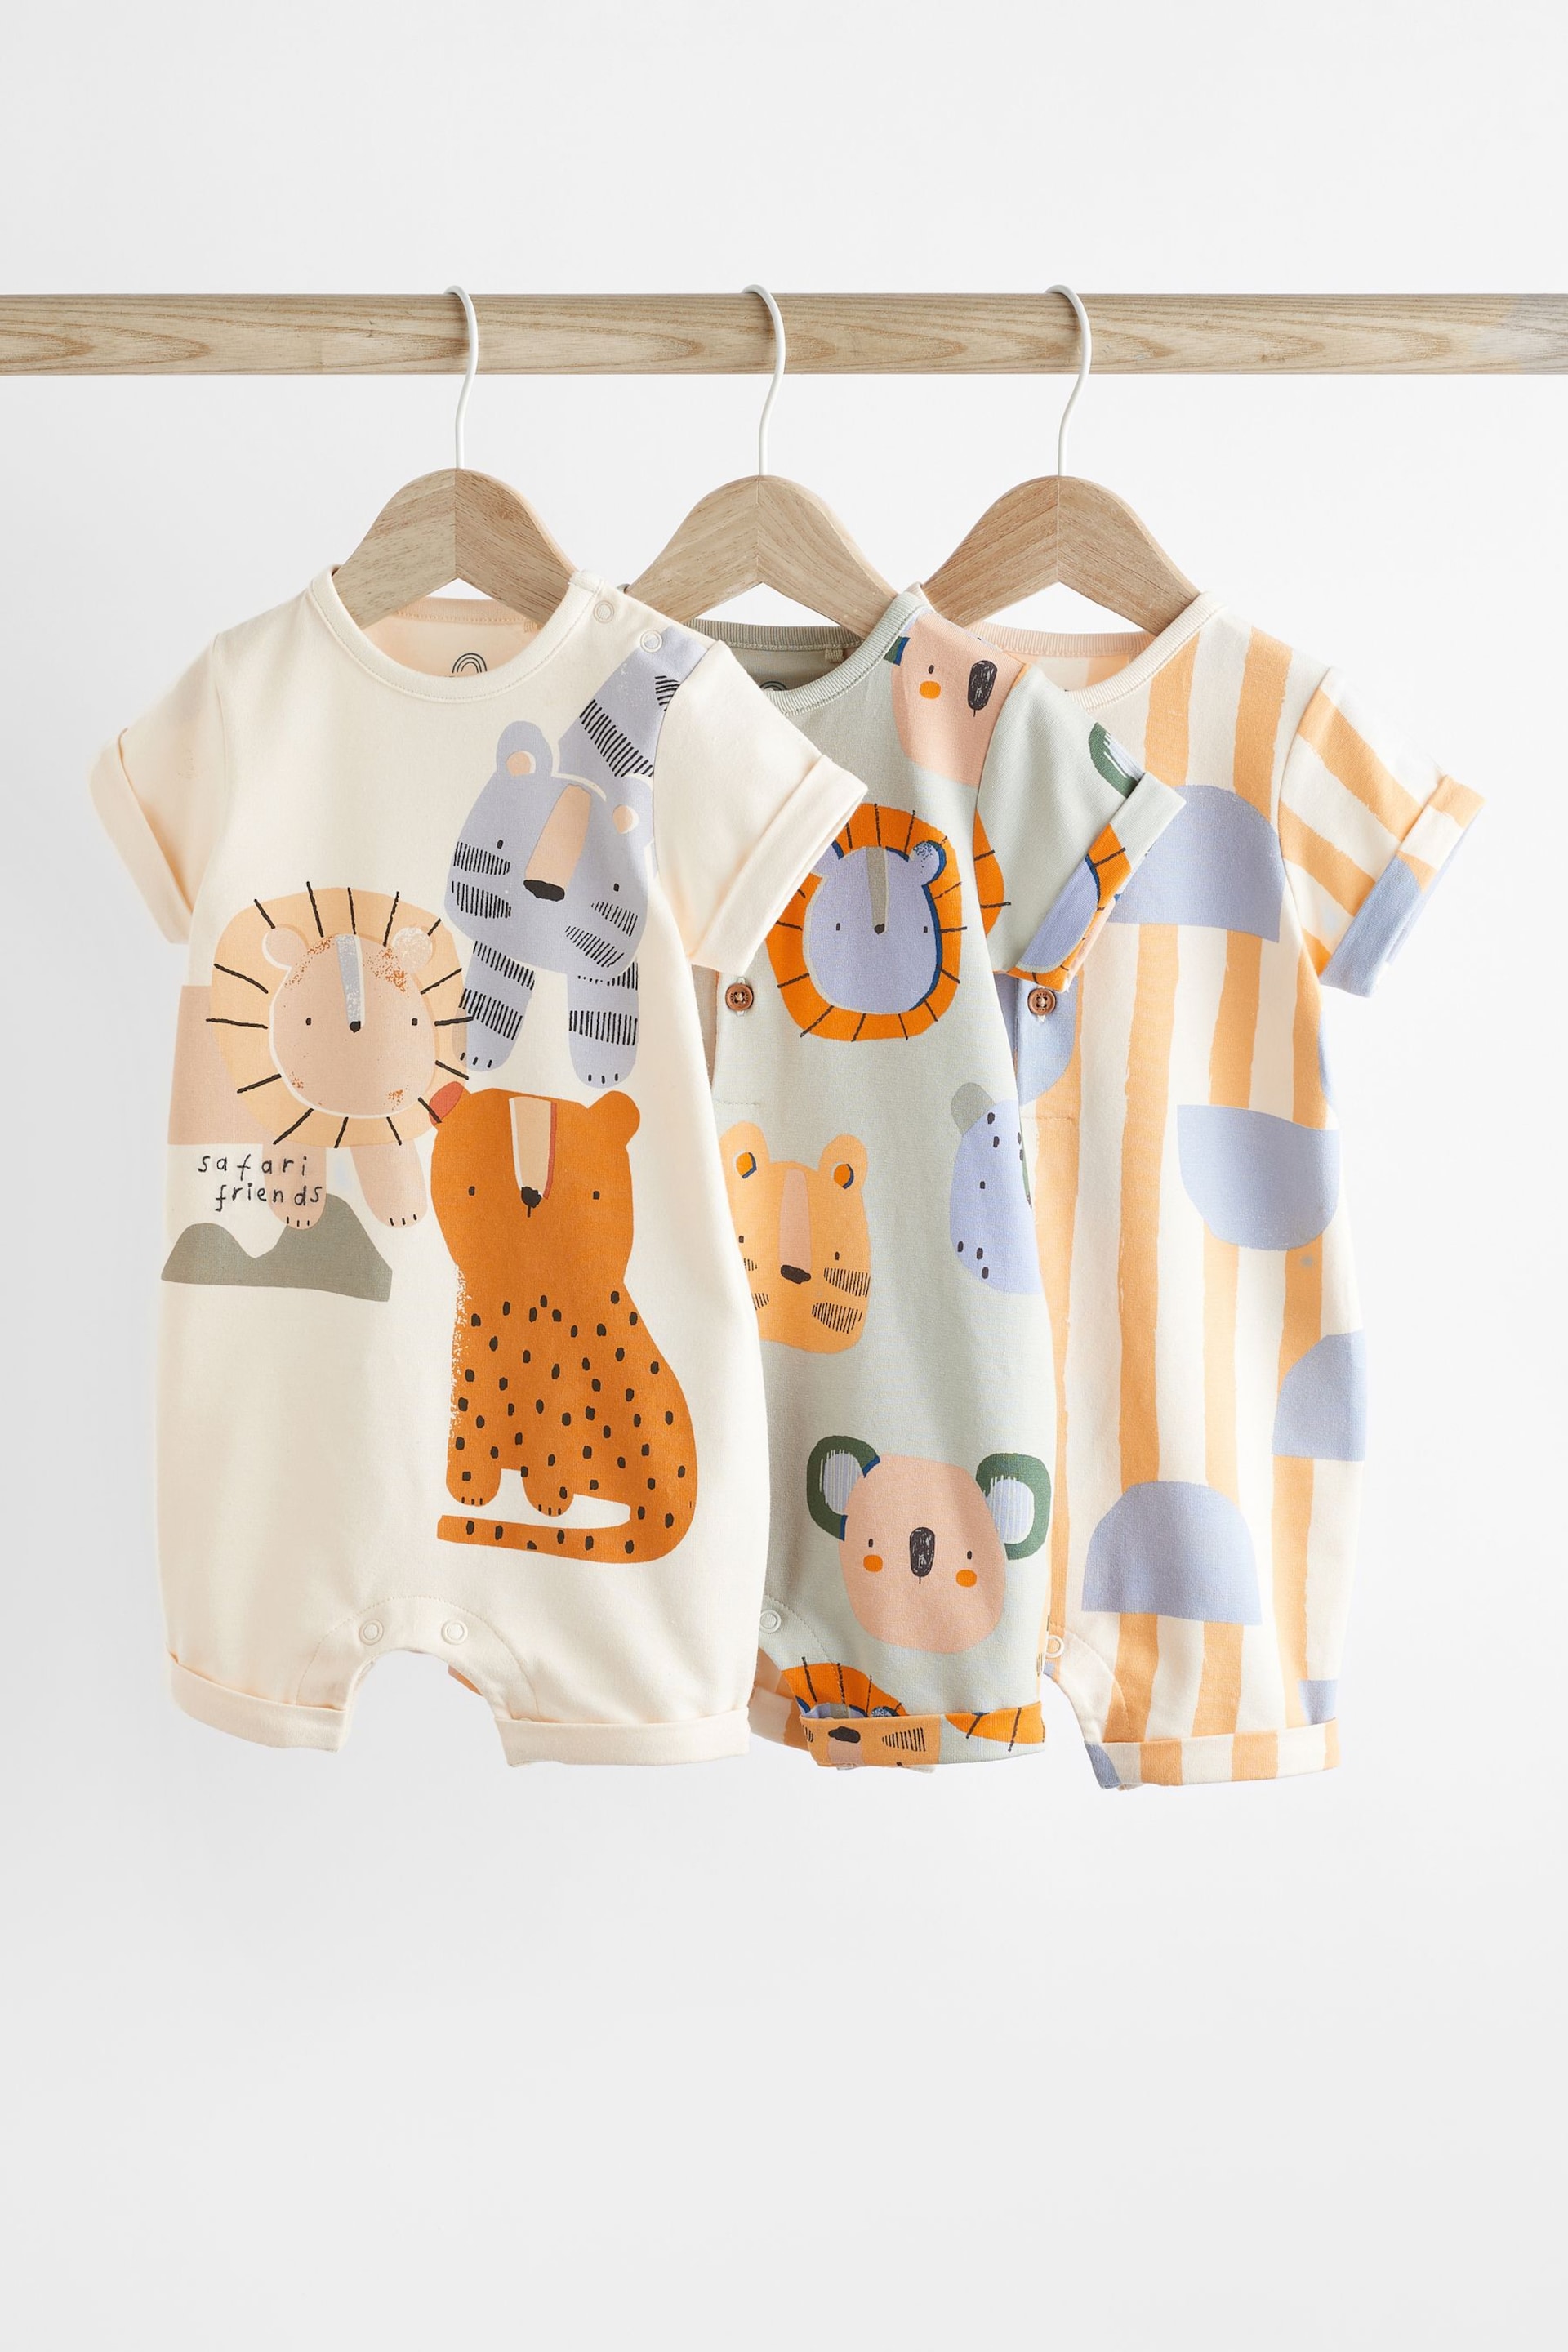 Minerals Character Baby Jersey Rompers 3 Pack - Image 1 of 11